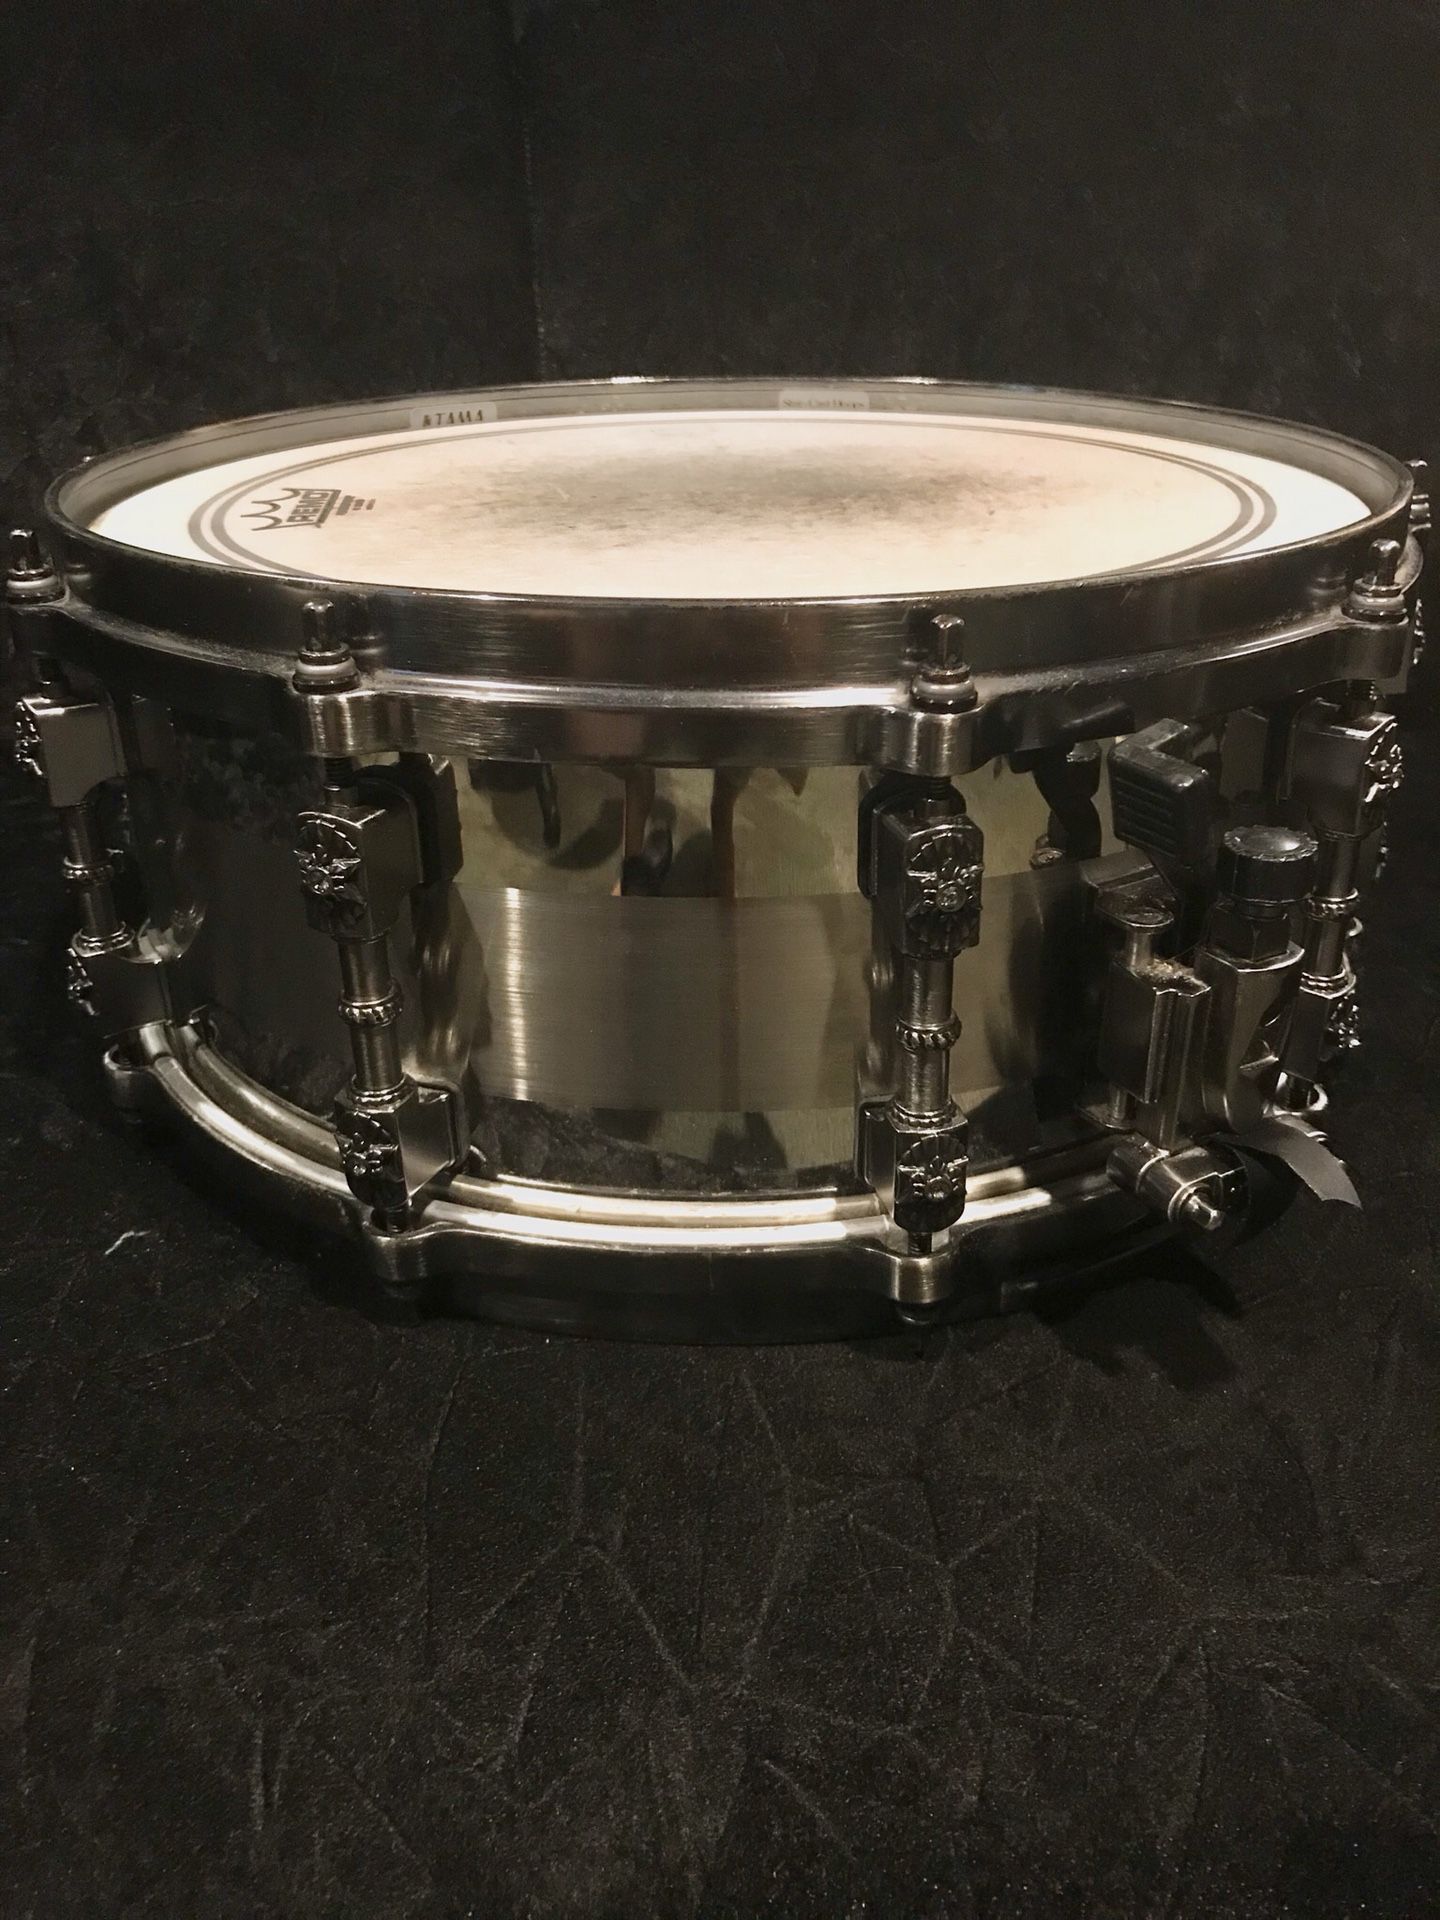 Tama Warlord Spartan Snare 6x14” Stainless Steel for Sale in